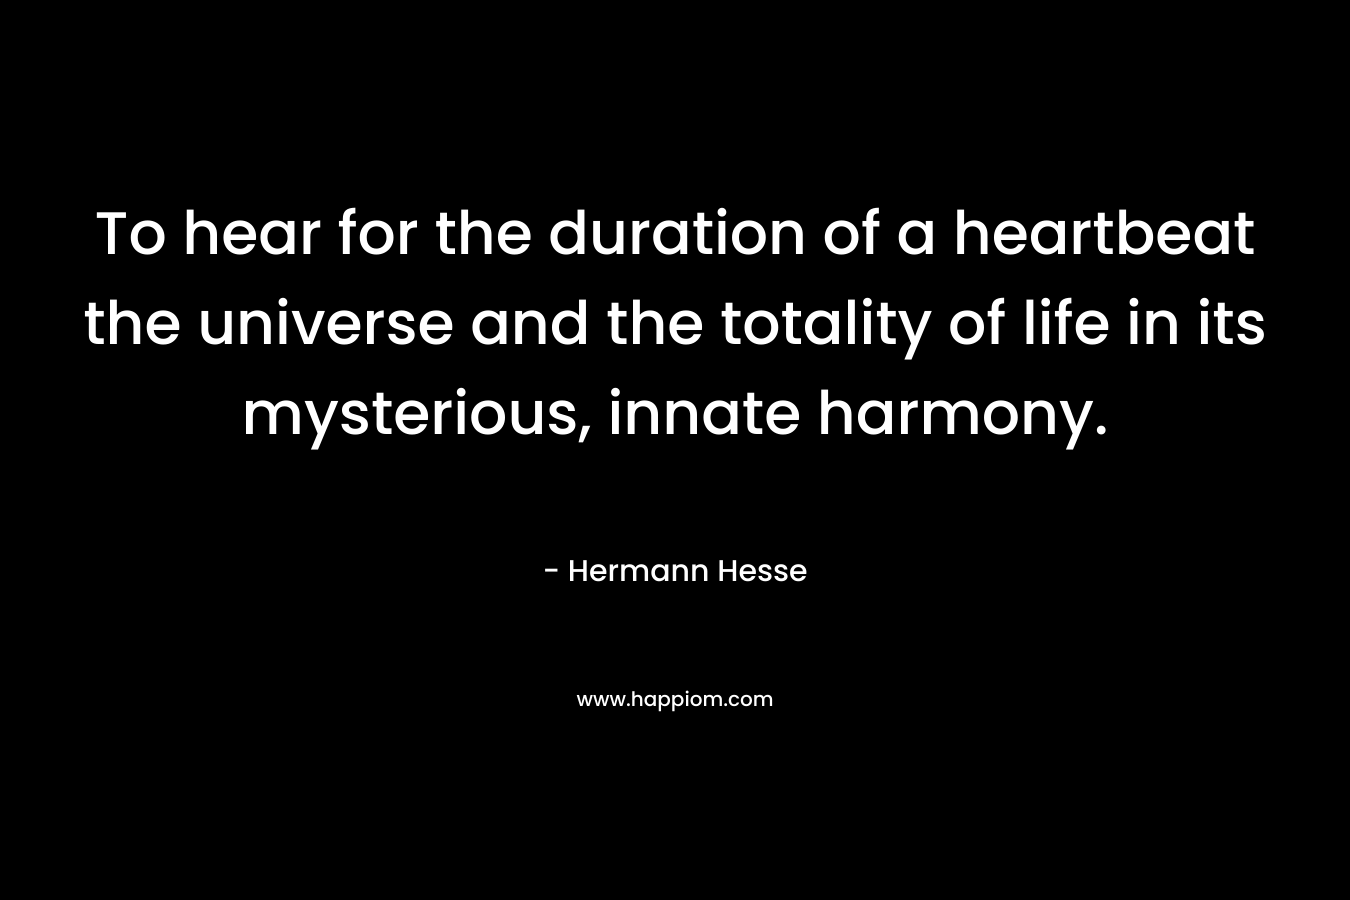 To hear for the duration of a heartbeat the universe and the totality of life in its mysterious, innate harmony.